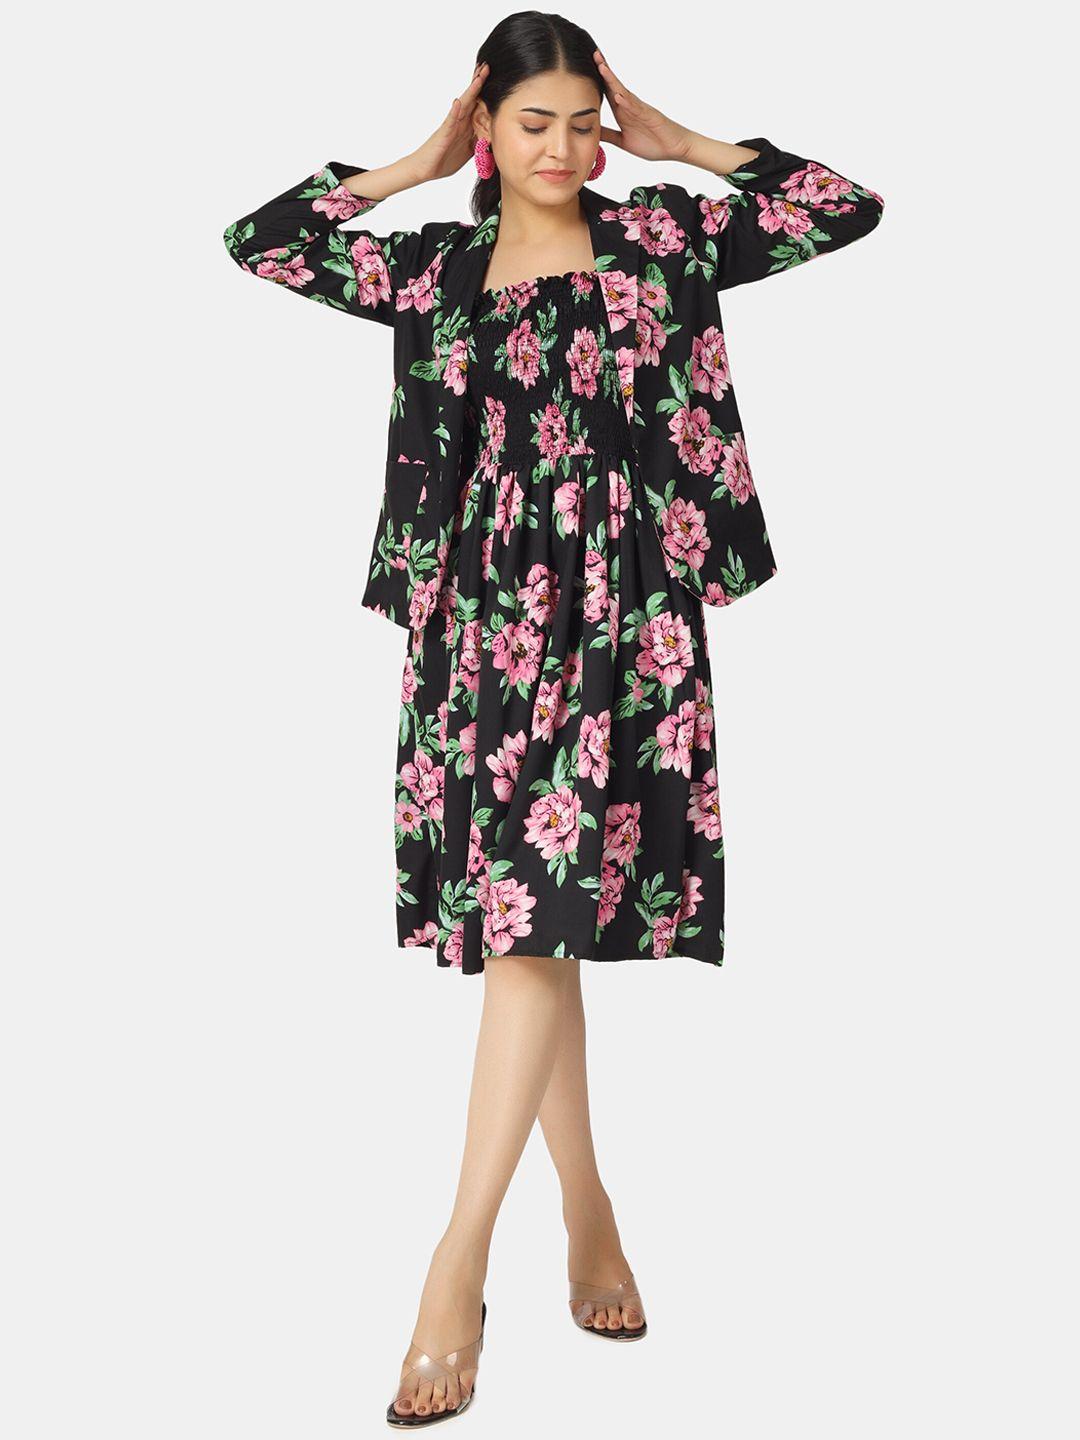 angloindu women floral printed co-ords